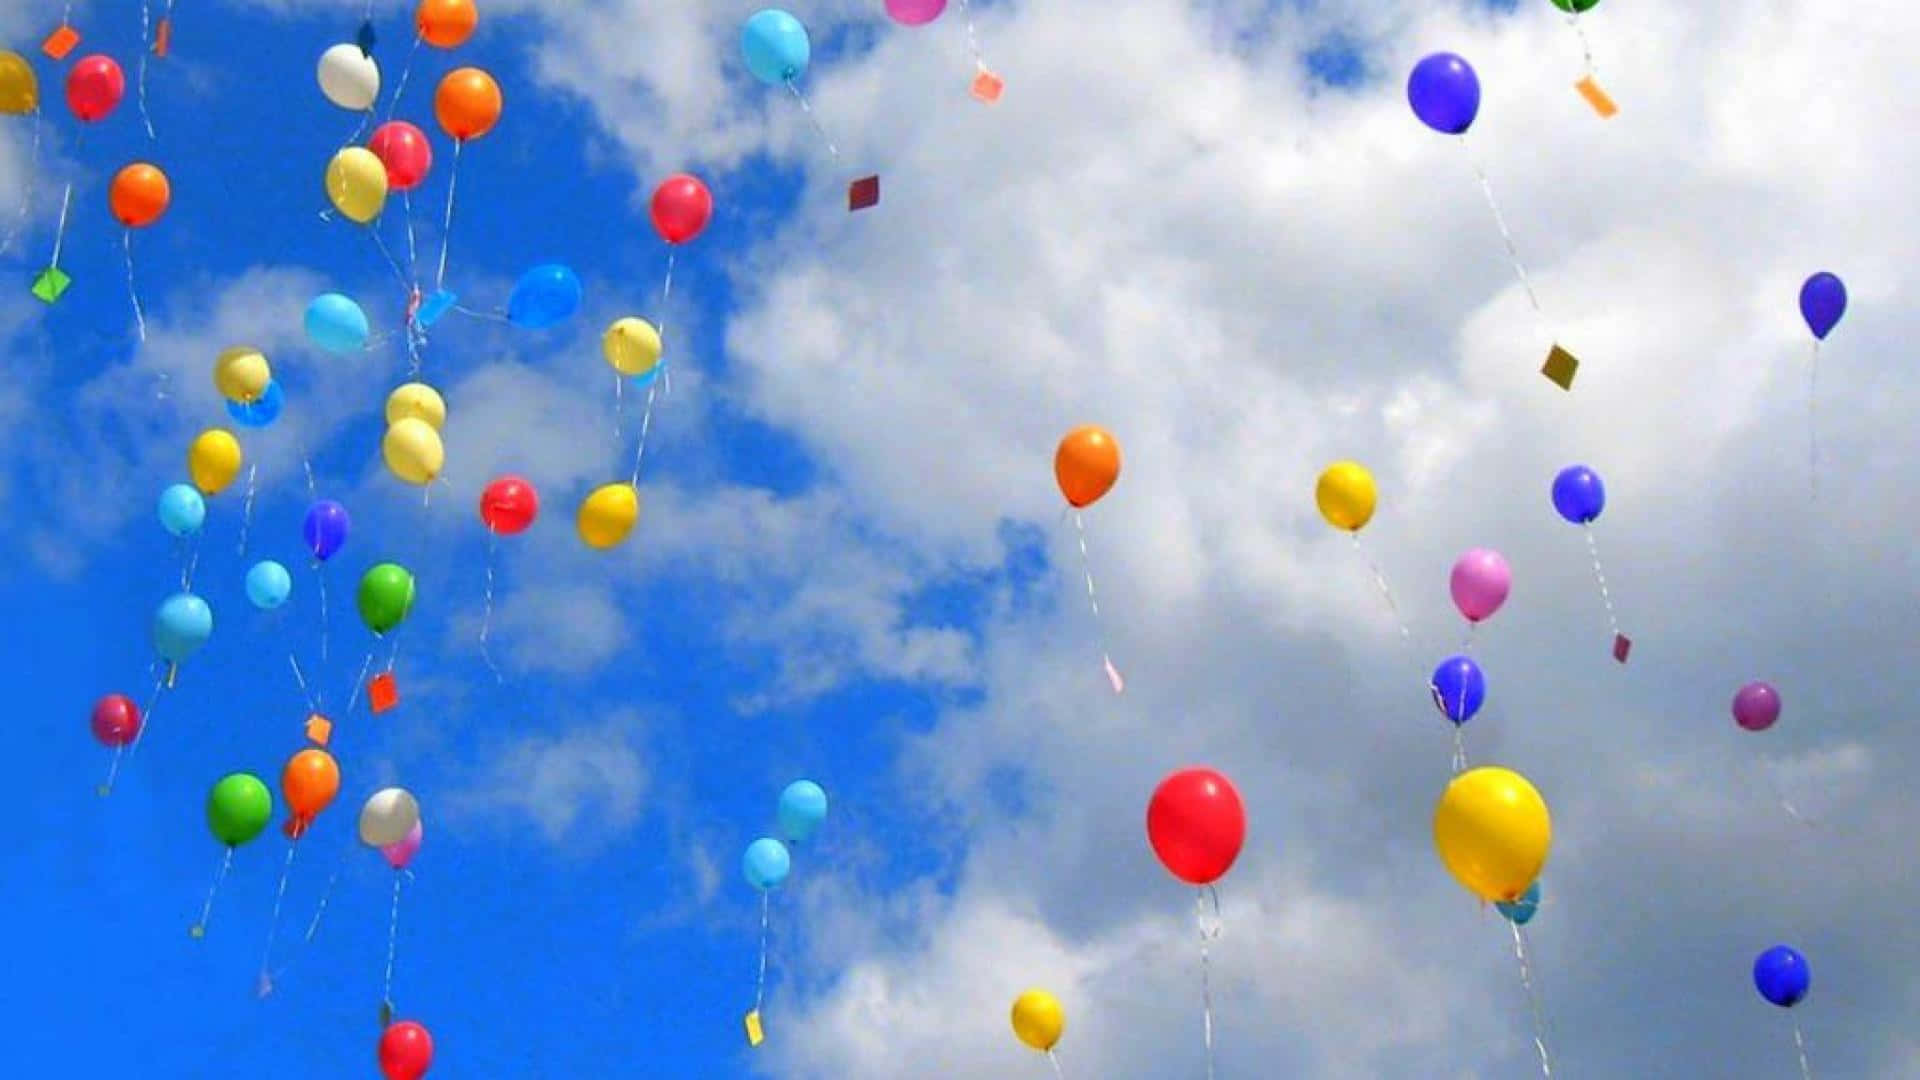 Blast off with Colorful Balloons!